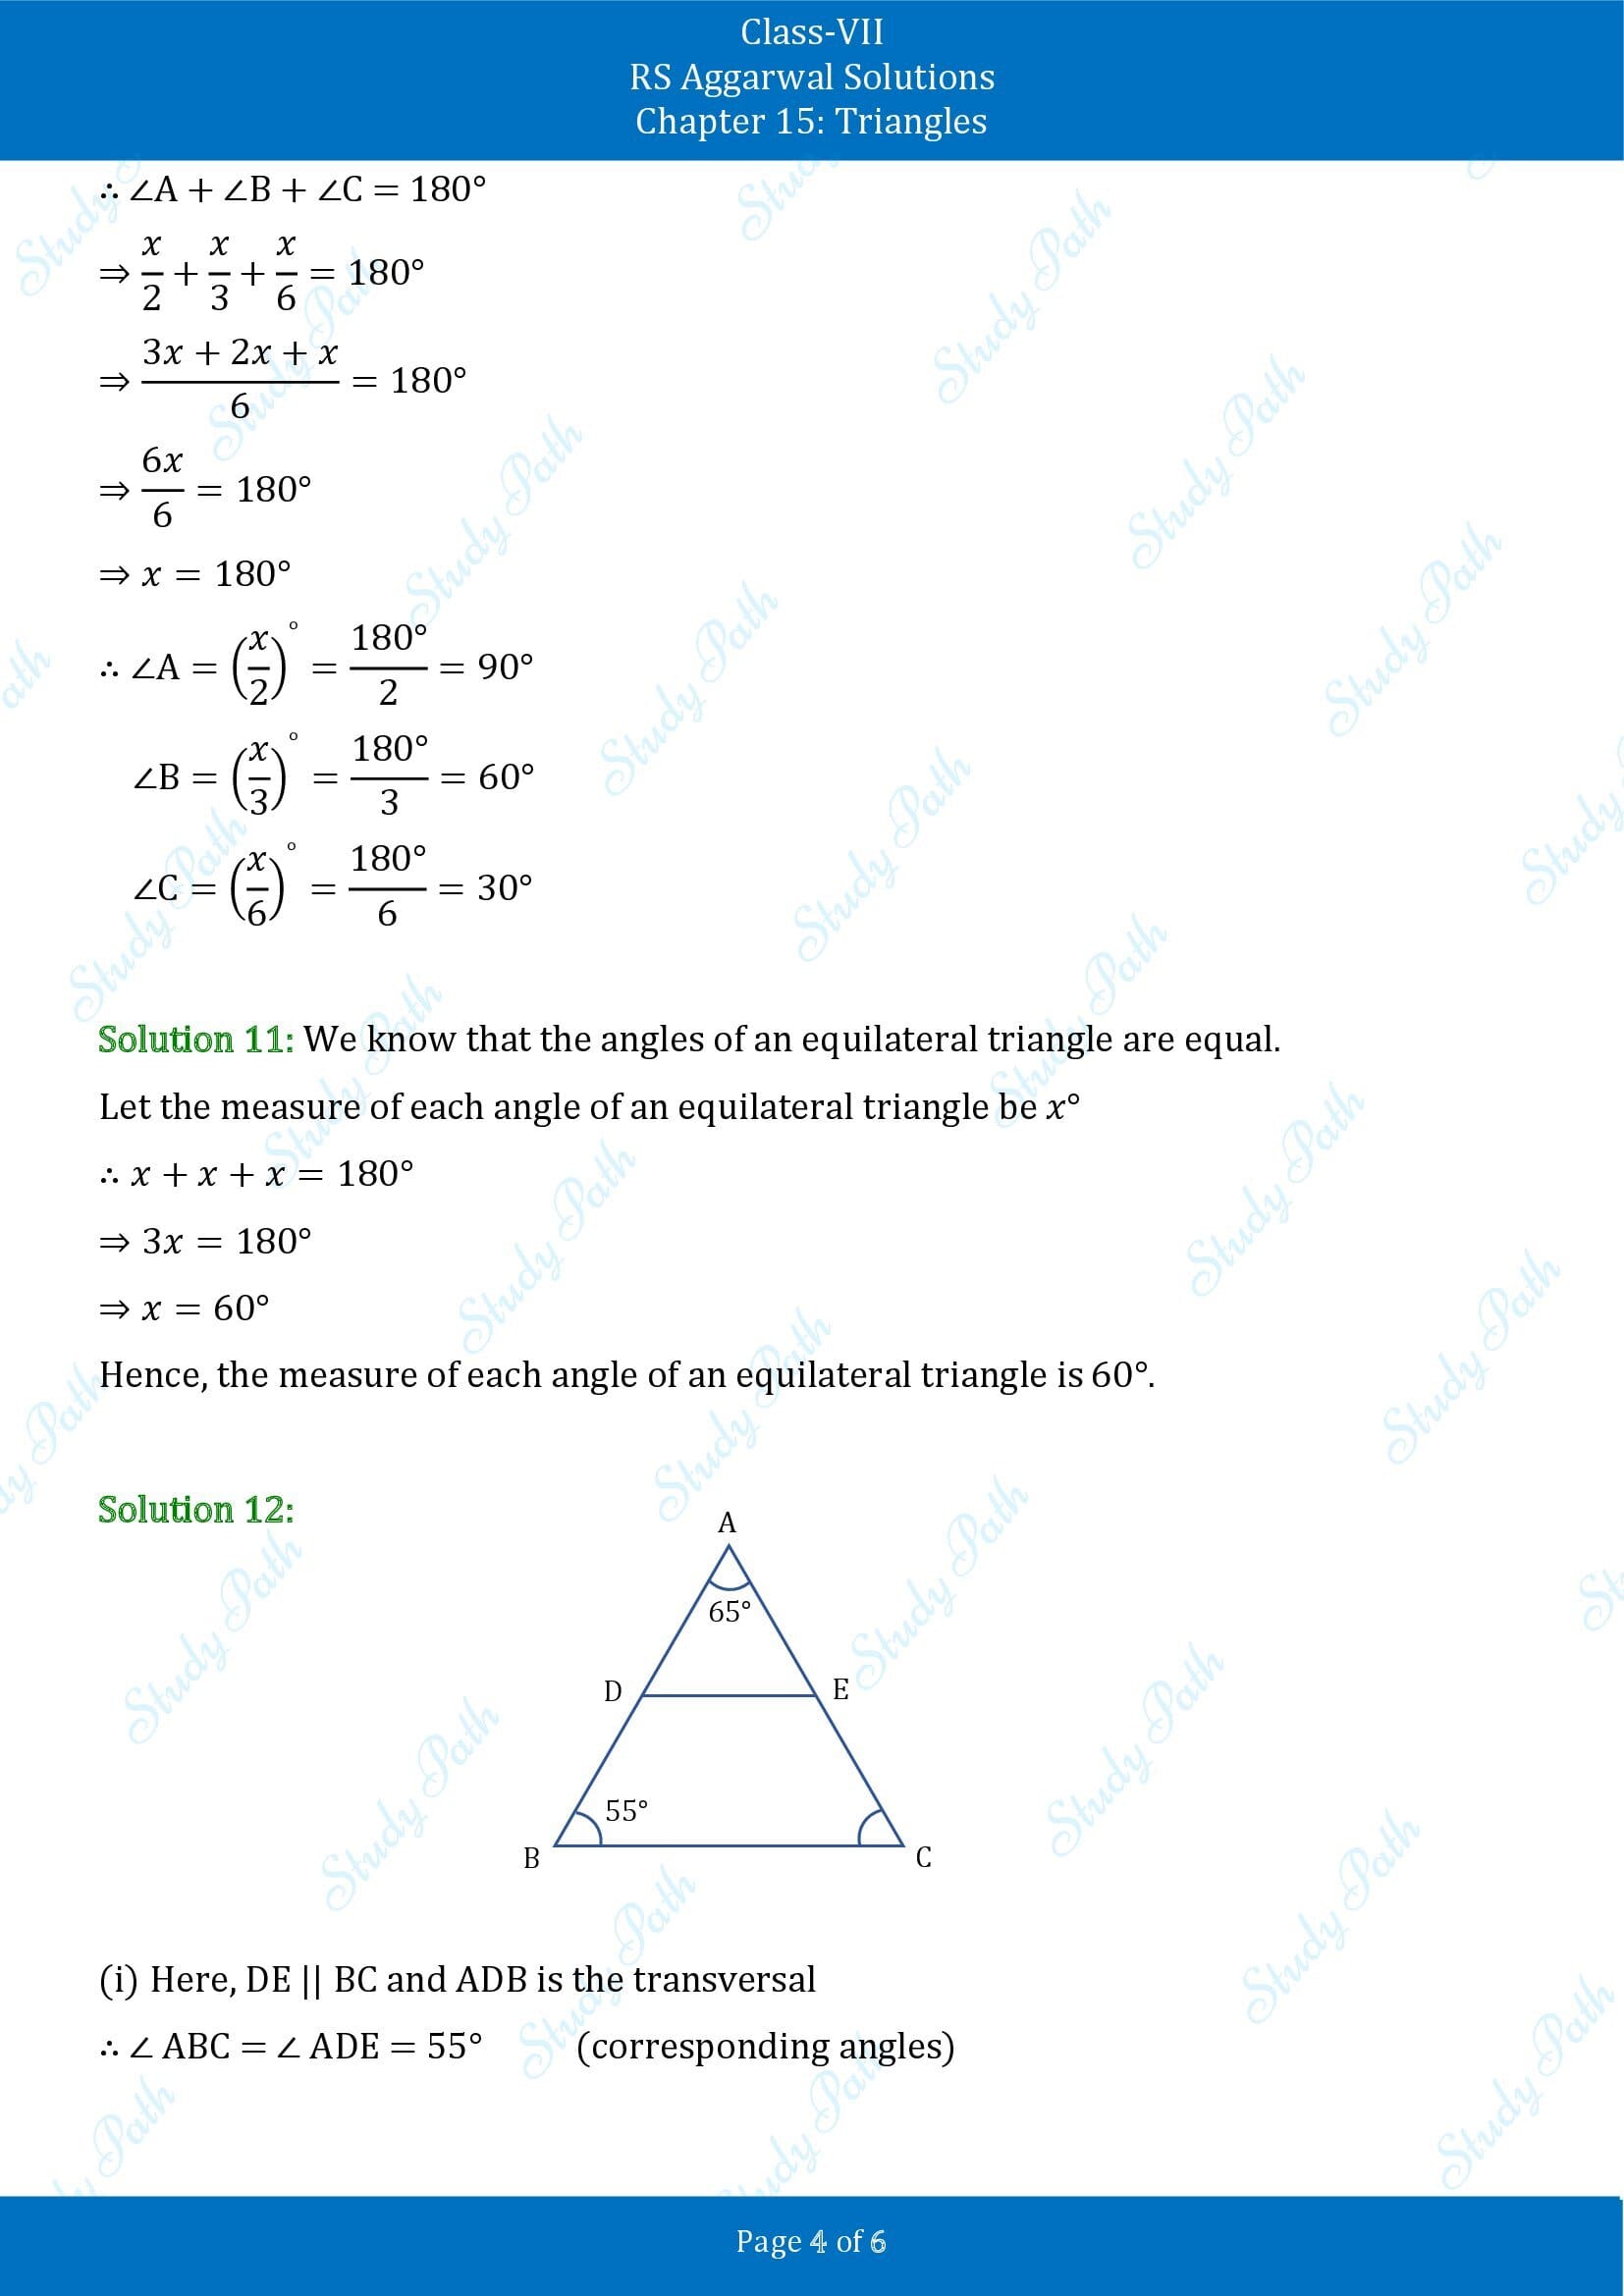 RS Aggarwal Solutions Class 7 Chapter 15 Triangles Exercise 15A 00004